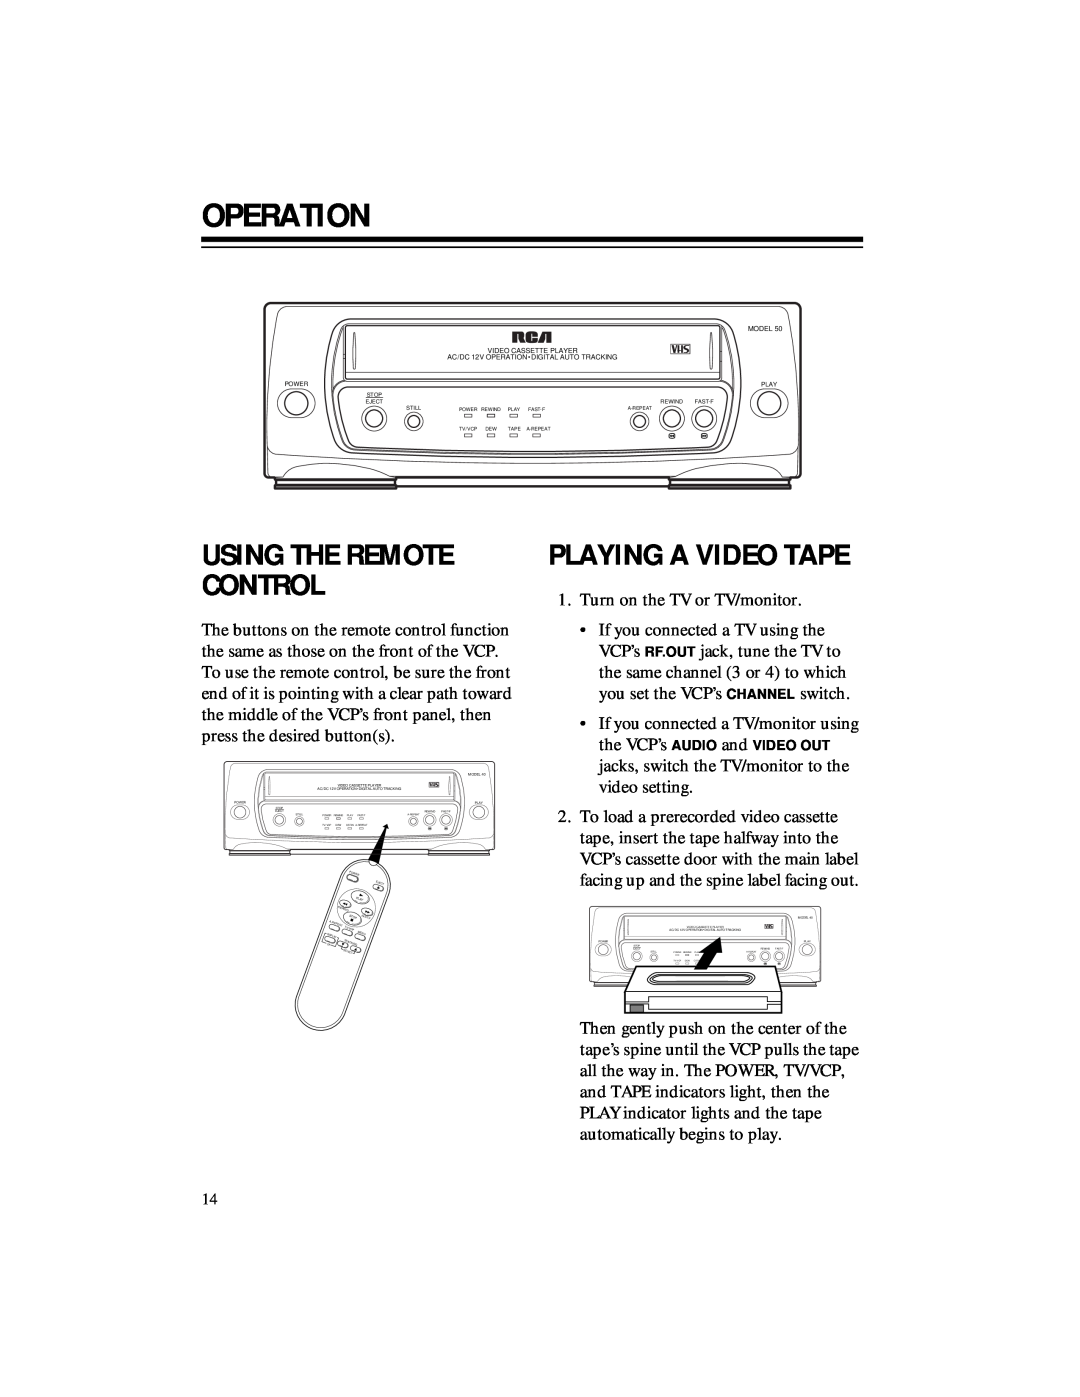 RCA 50, 40 owner manual Operation, Playing A Video Tape, Using The Remote Control 